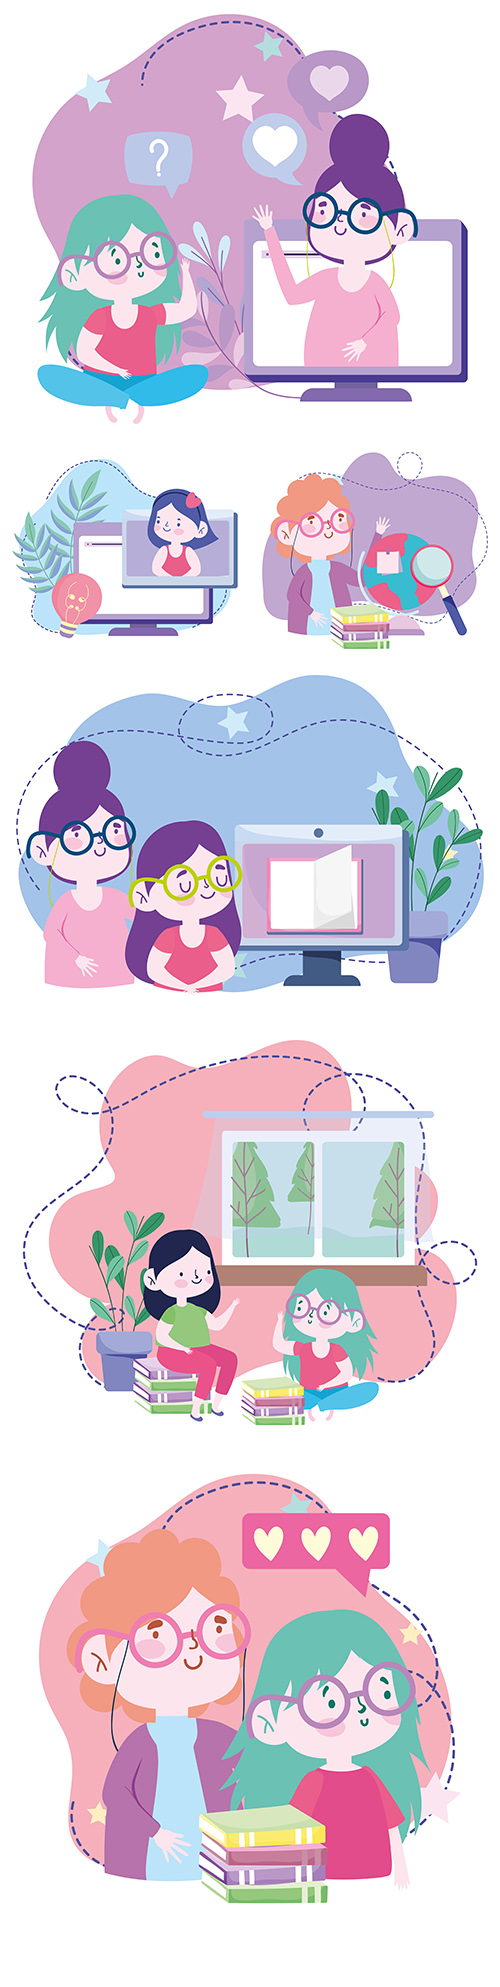 Online education and homework painted flat illustrations
